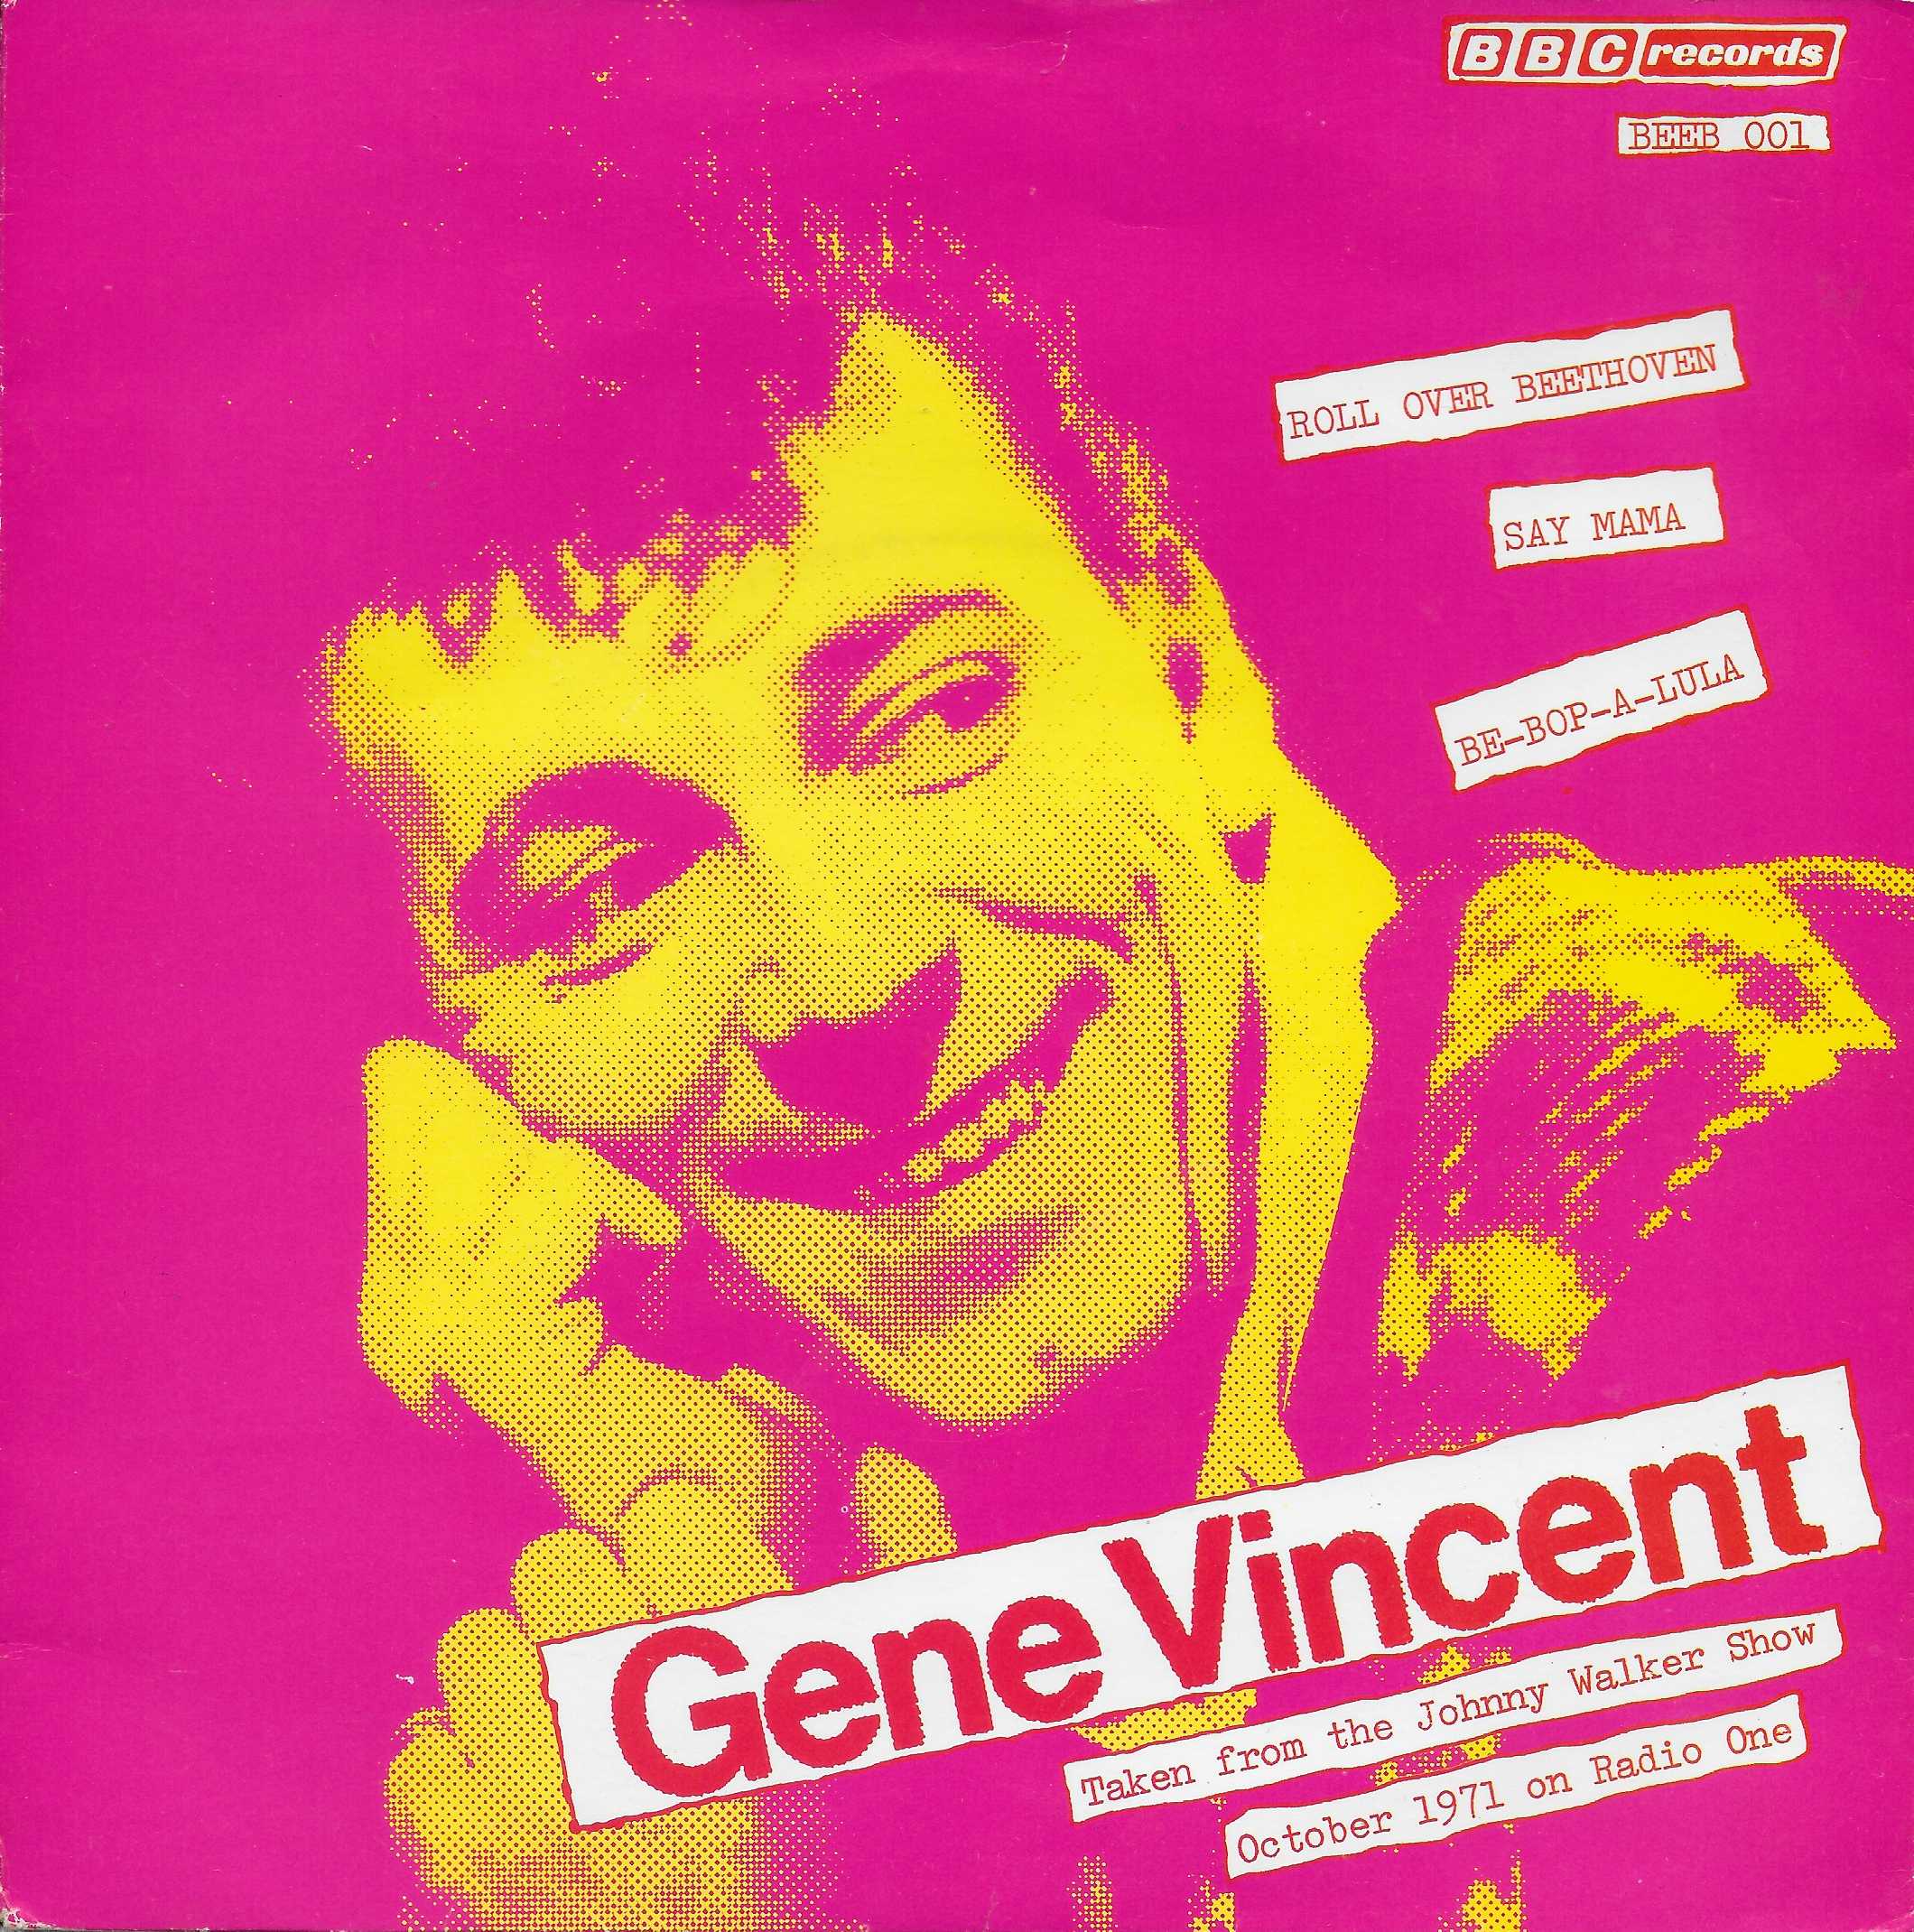 Picture of BEEB 001 Roll over Beethoven by artist Berry / Gene Vincent from the BBC records and Tapes library